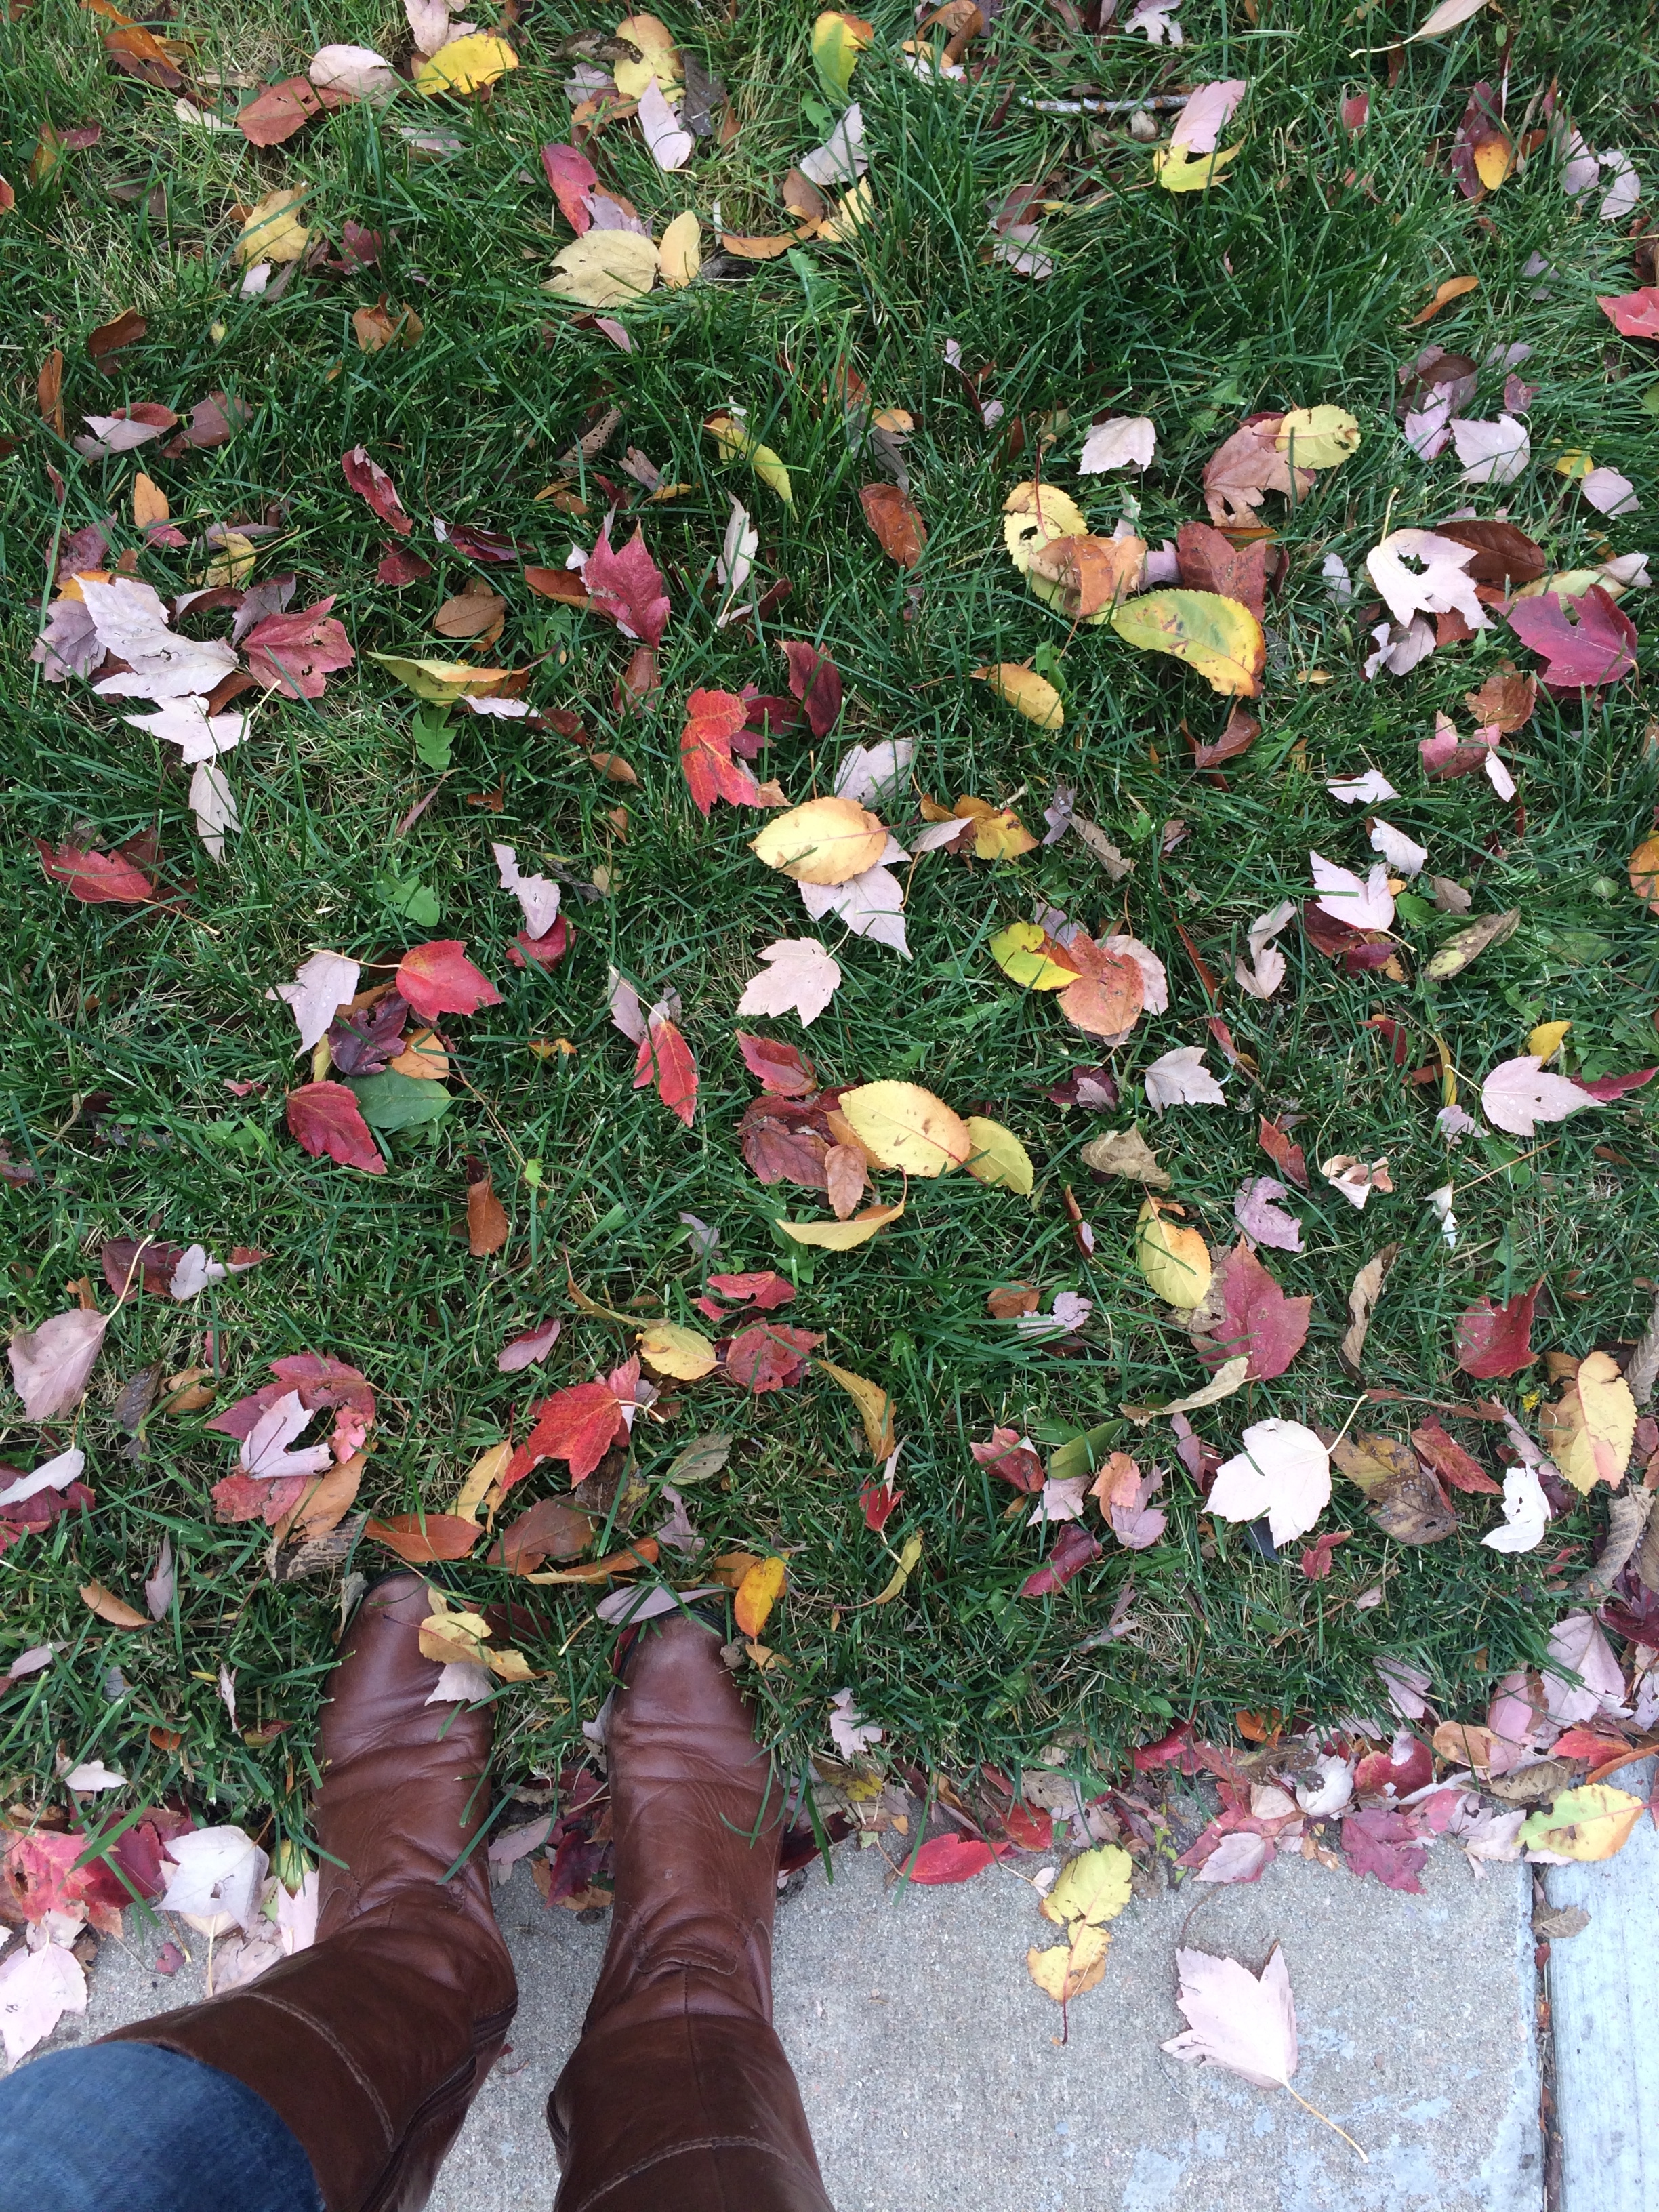 me and my fall boots in the leaves